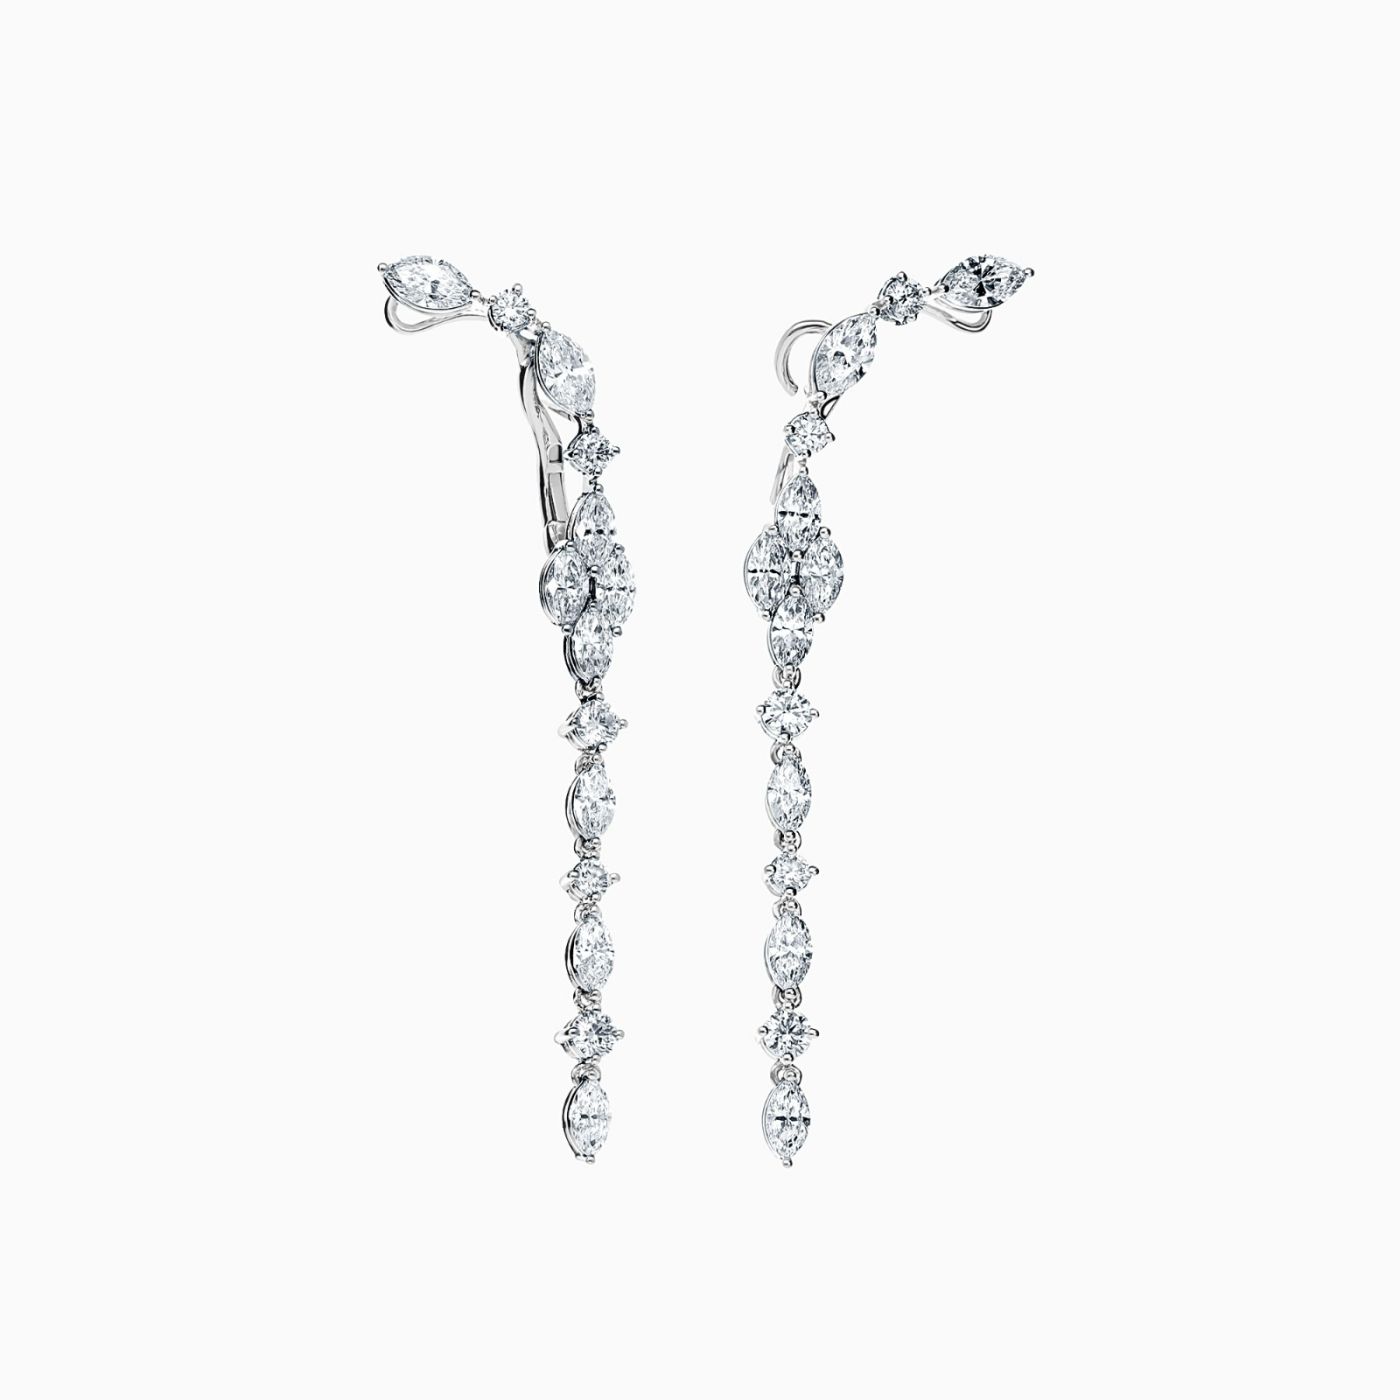 White gold earrings with multi-shaped diamonds